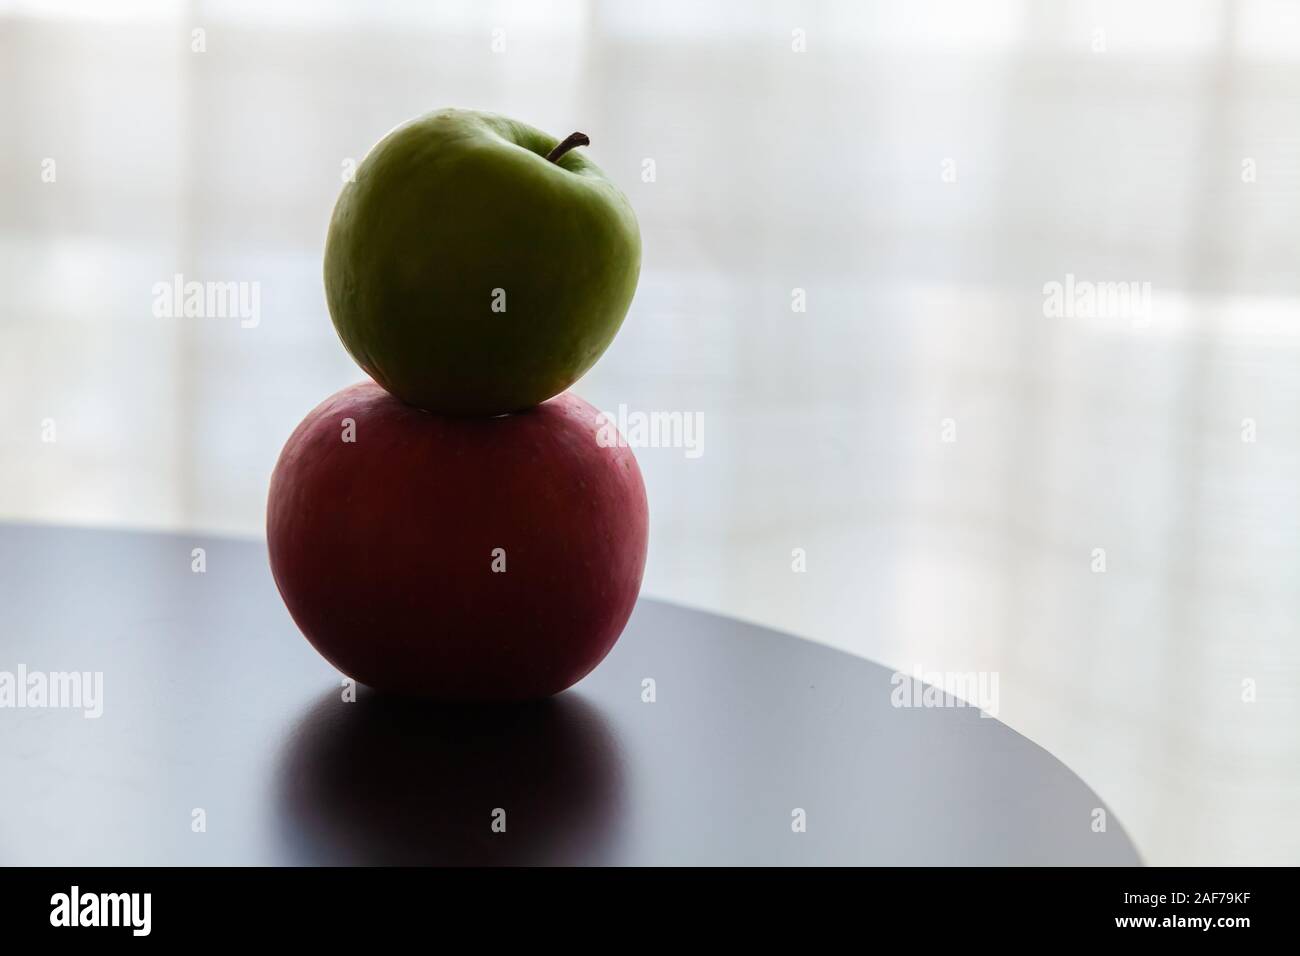 Two apples green and red lay on a black table. Close up low-key photo with soft selective focus Stock Photo